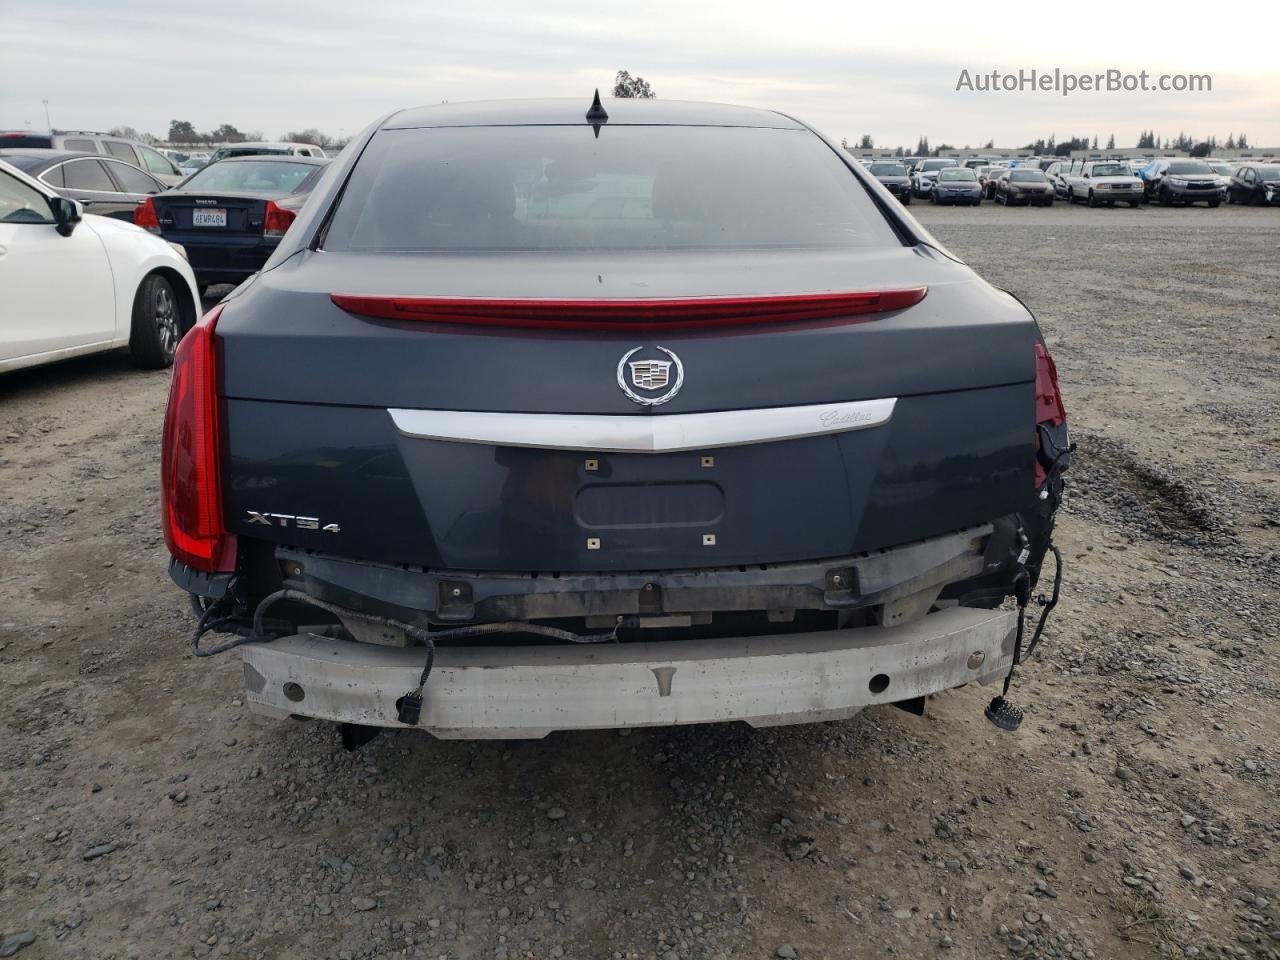 2013 Cadillac Xts Luxury Collection Gray vin: 2G61R5S35D9169332